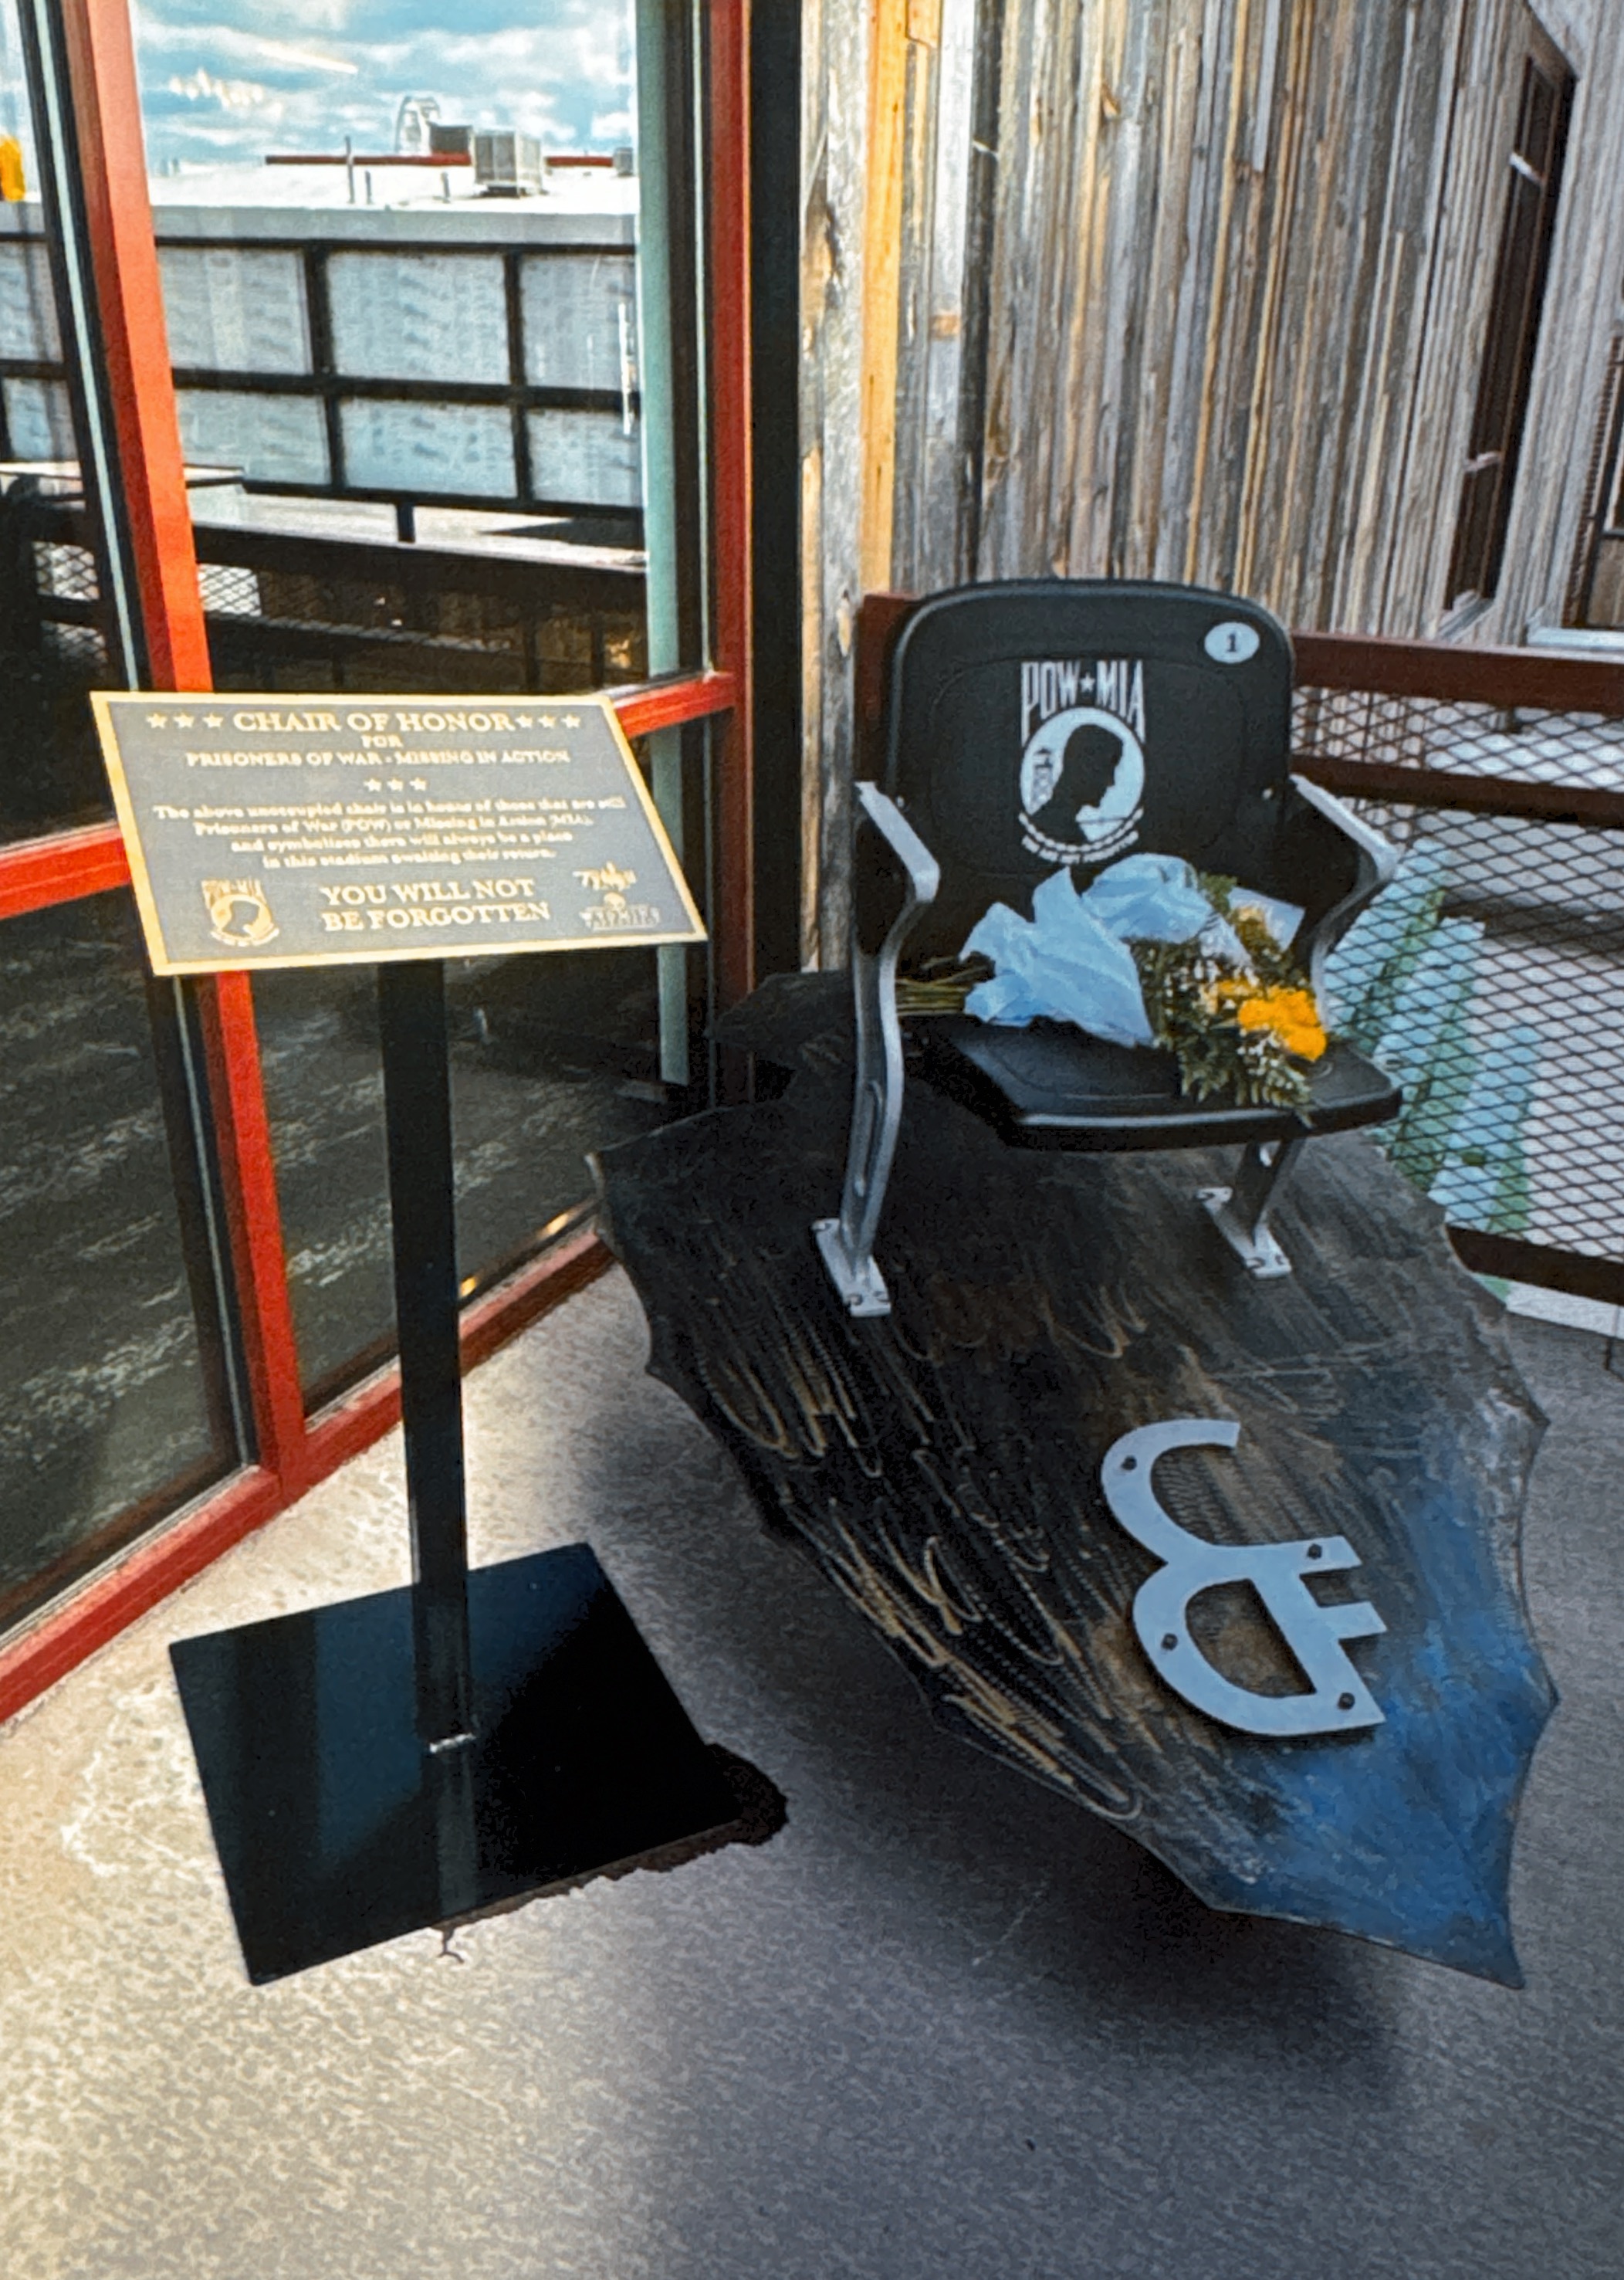 POW-MIA Chair of Honor presented to CFD on July 29, 2022 by “Veterans Remembrance Memorial”